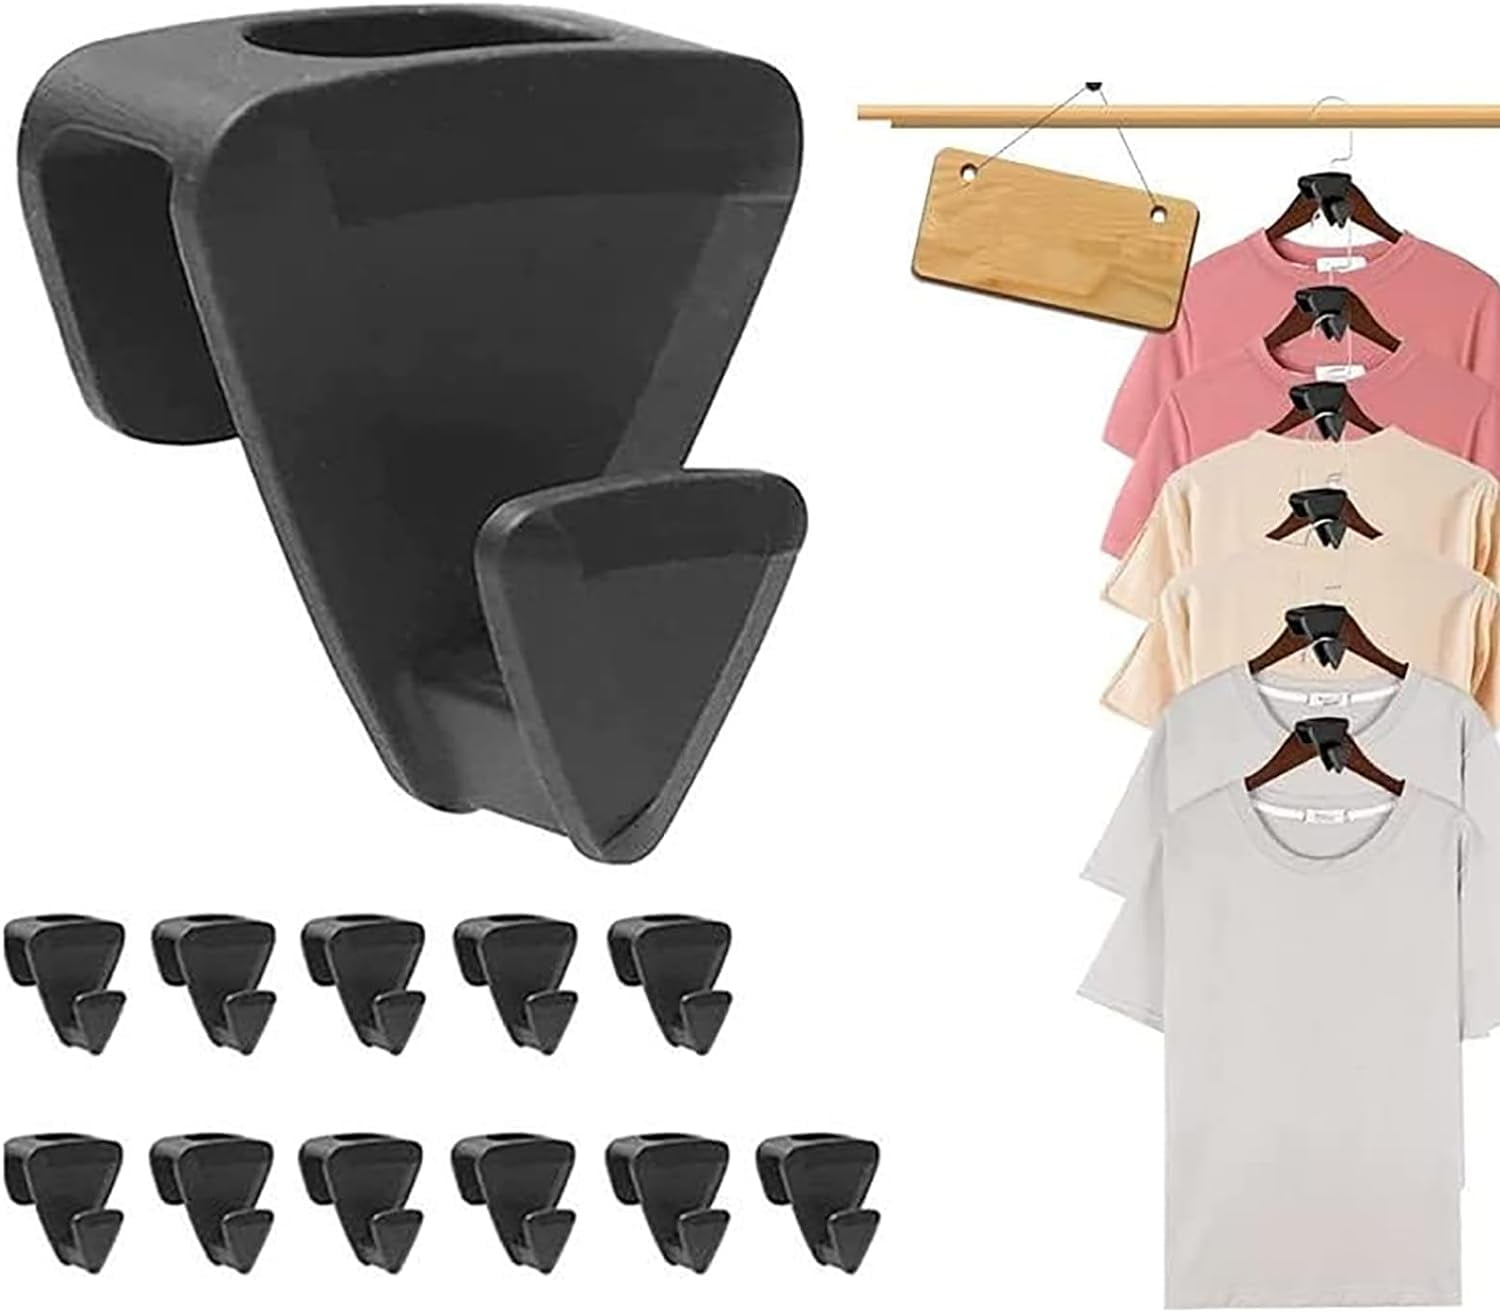 Triangles Hanger Hooks, Space Saving Hanger Hooks for Organizer Closet Clothes Hanger Connector Hooks to Create Up to 5X More Closet Space Fits All